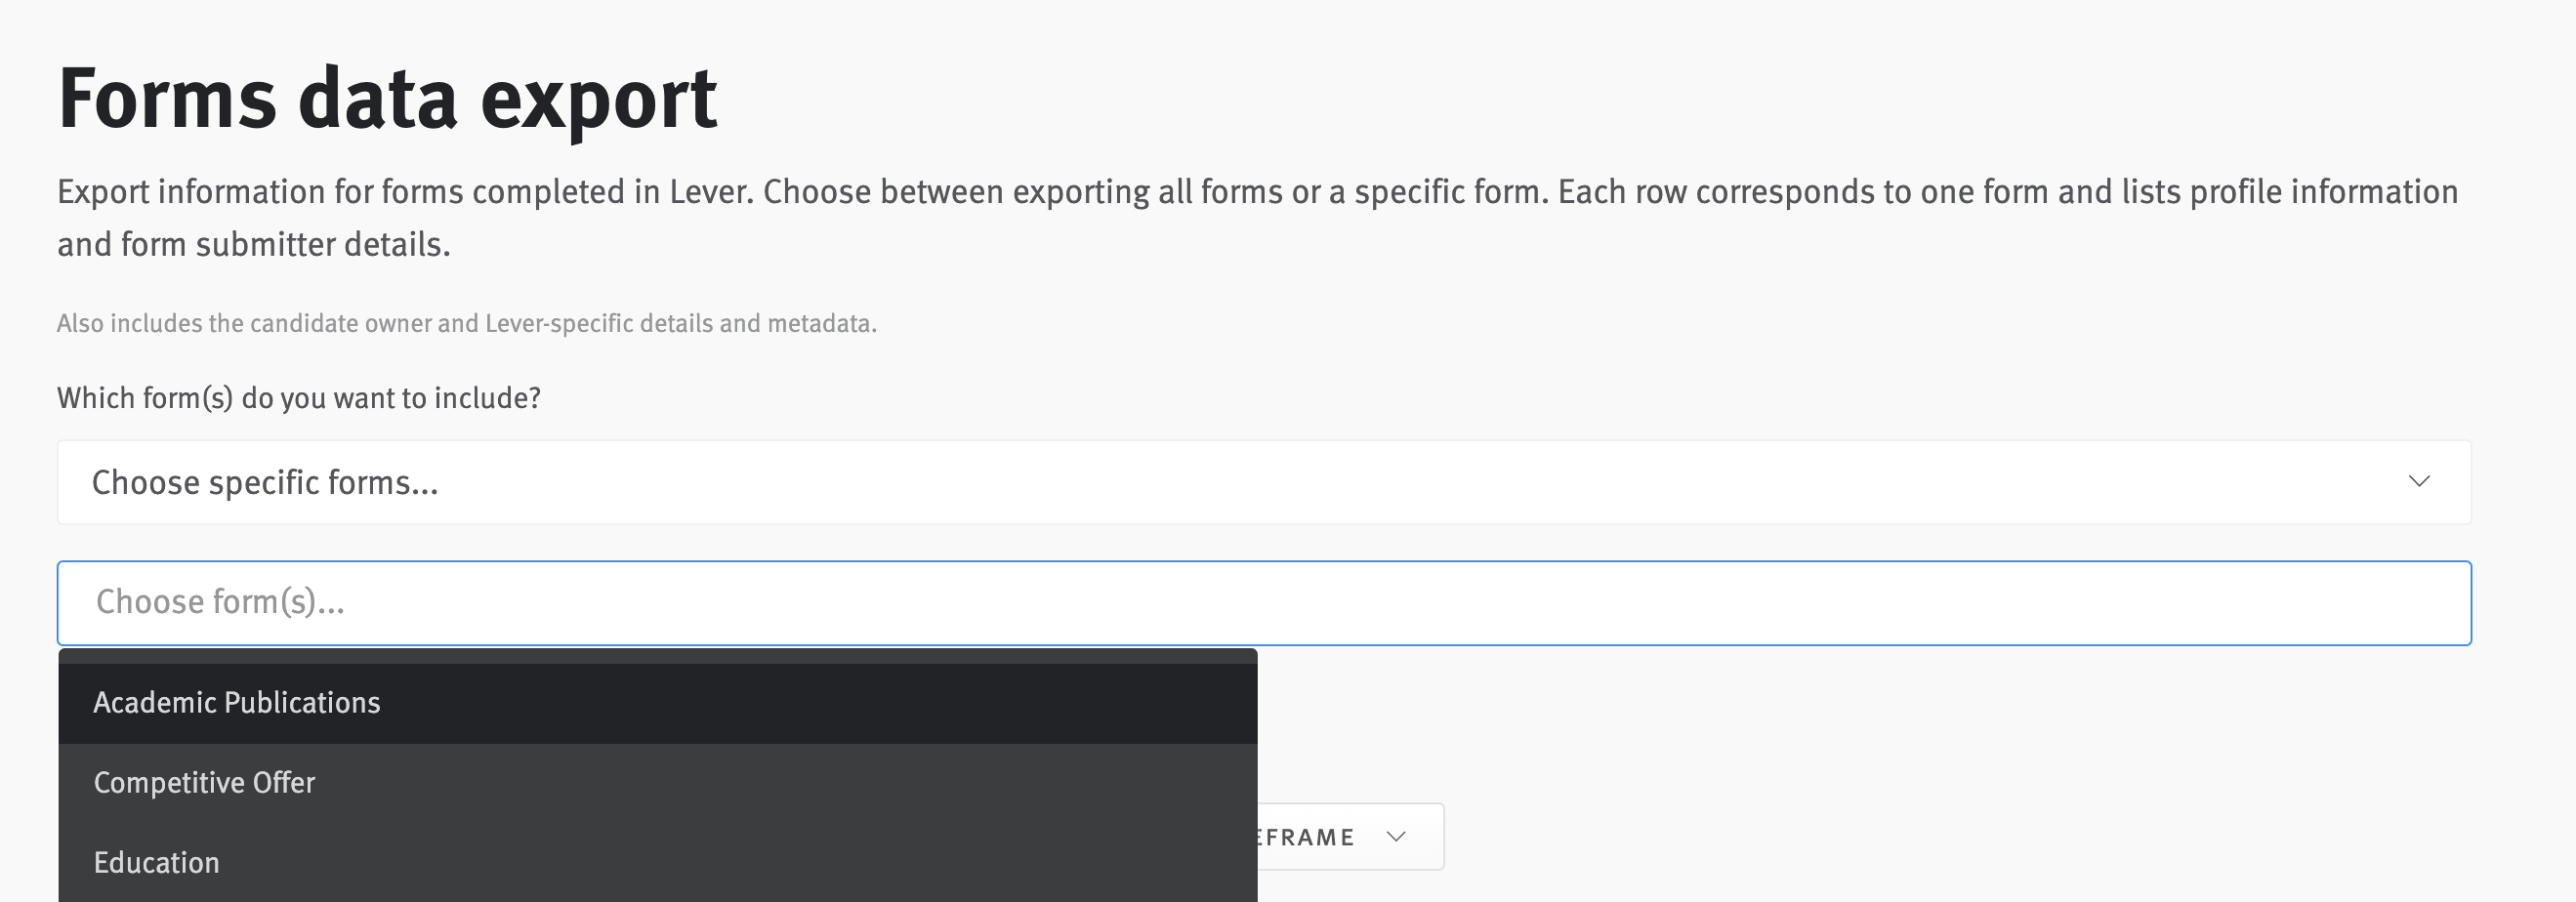 Forms data export fields with menu extending from second field and question set from previous image highlighted.